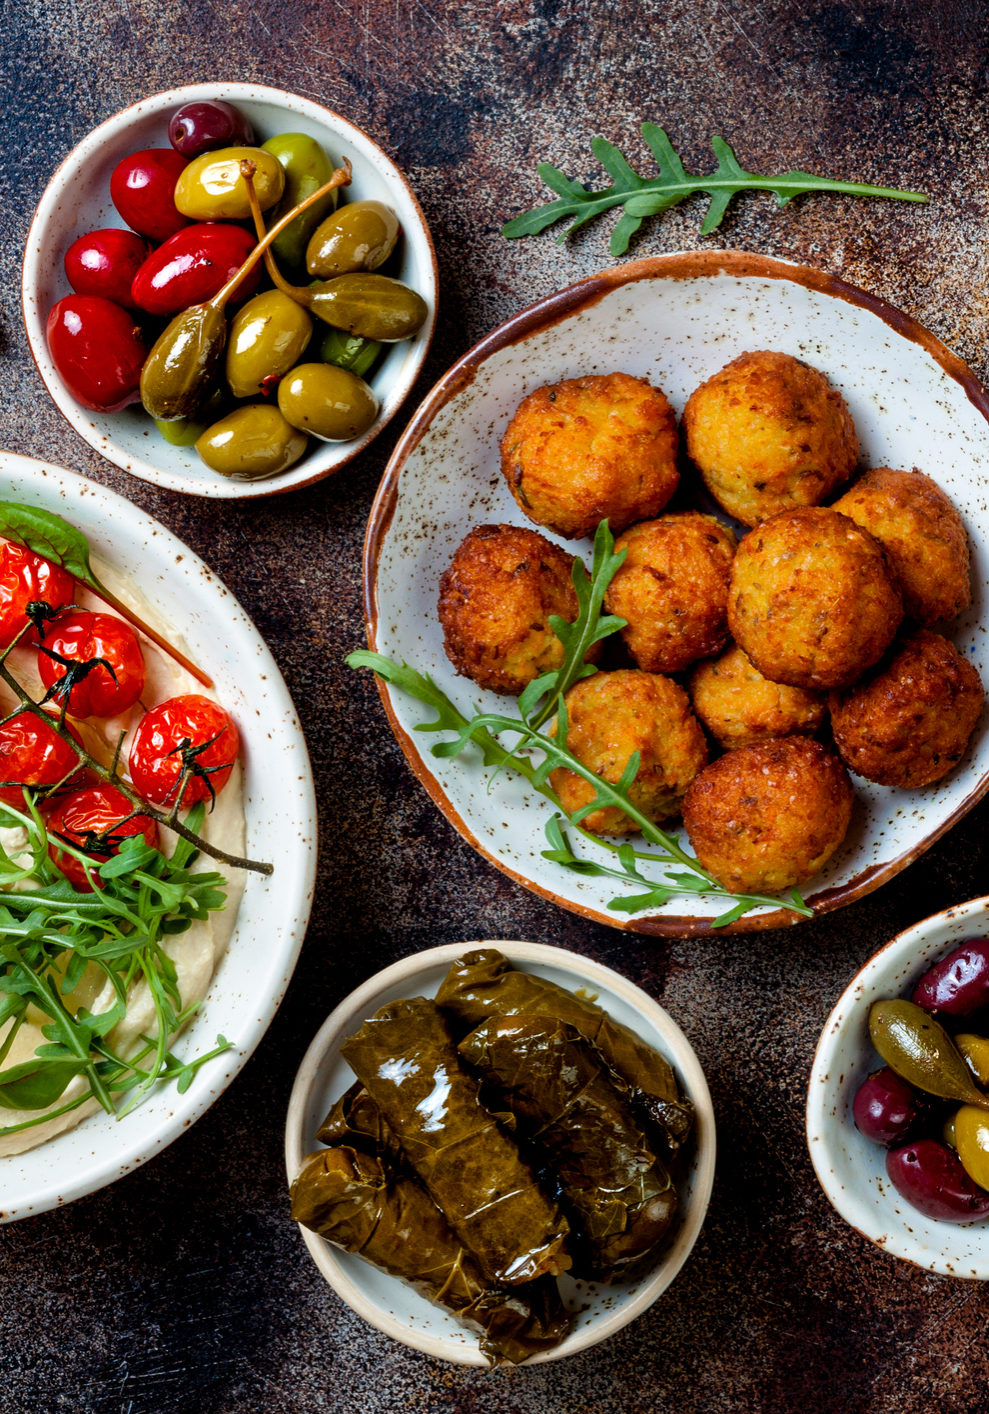 Arabic traditional cuisine. Middle Eastern meze with pita, olives, hummus, stuffed dolma, falafel balls, pickles. Mediterranean appetizer party idea